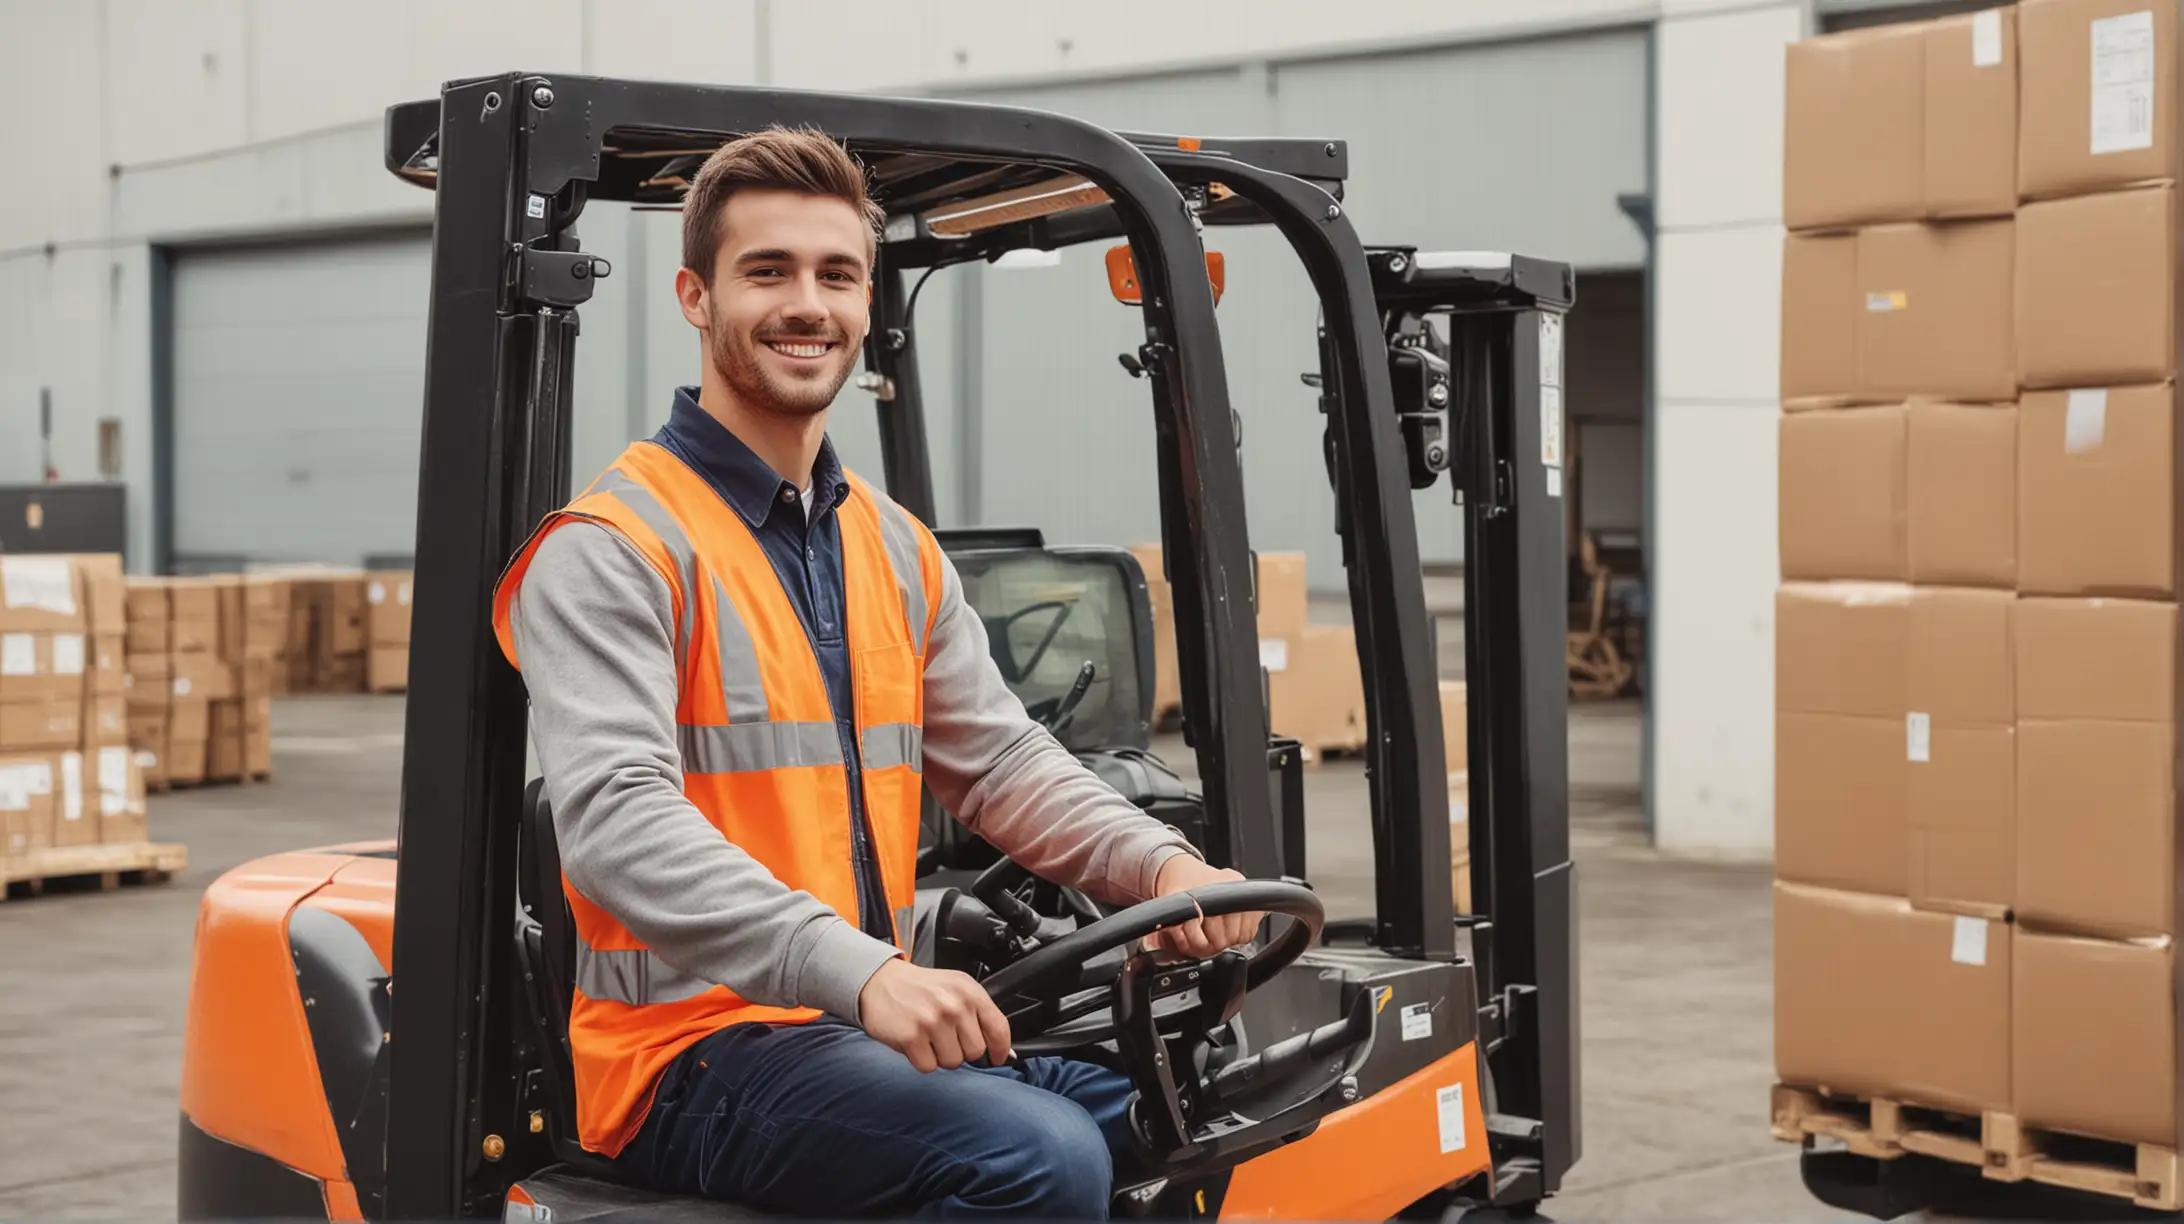 Young European Warehouse Worker Operating Forklift with Large Packages in Outdoor Hall Entrance